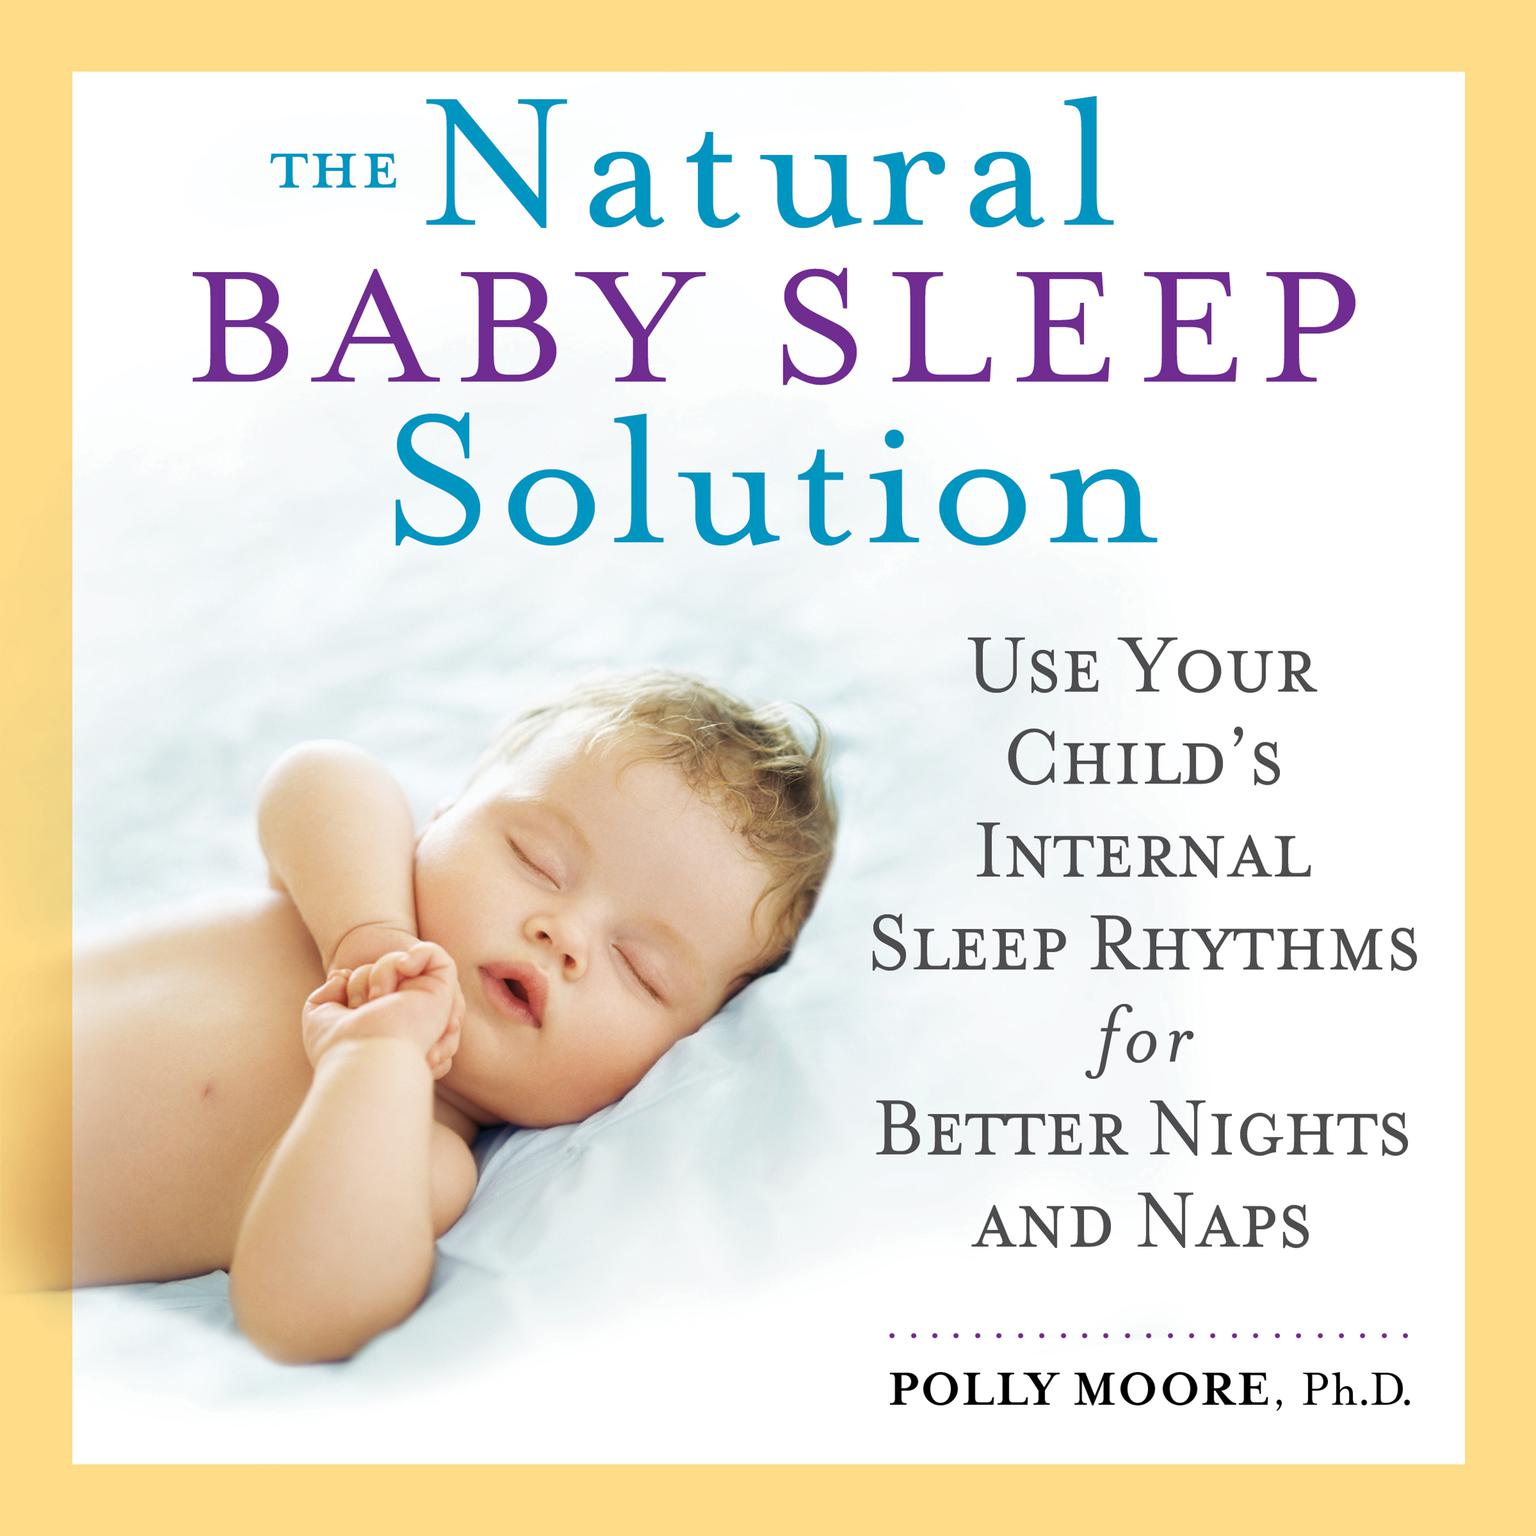 The Natural Baby Sleep Solution: Use Your Childs Internal Sleep Rhythms for Better Nights and Naps Audiobook, by Polly Moore Ph.D.